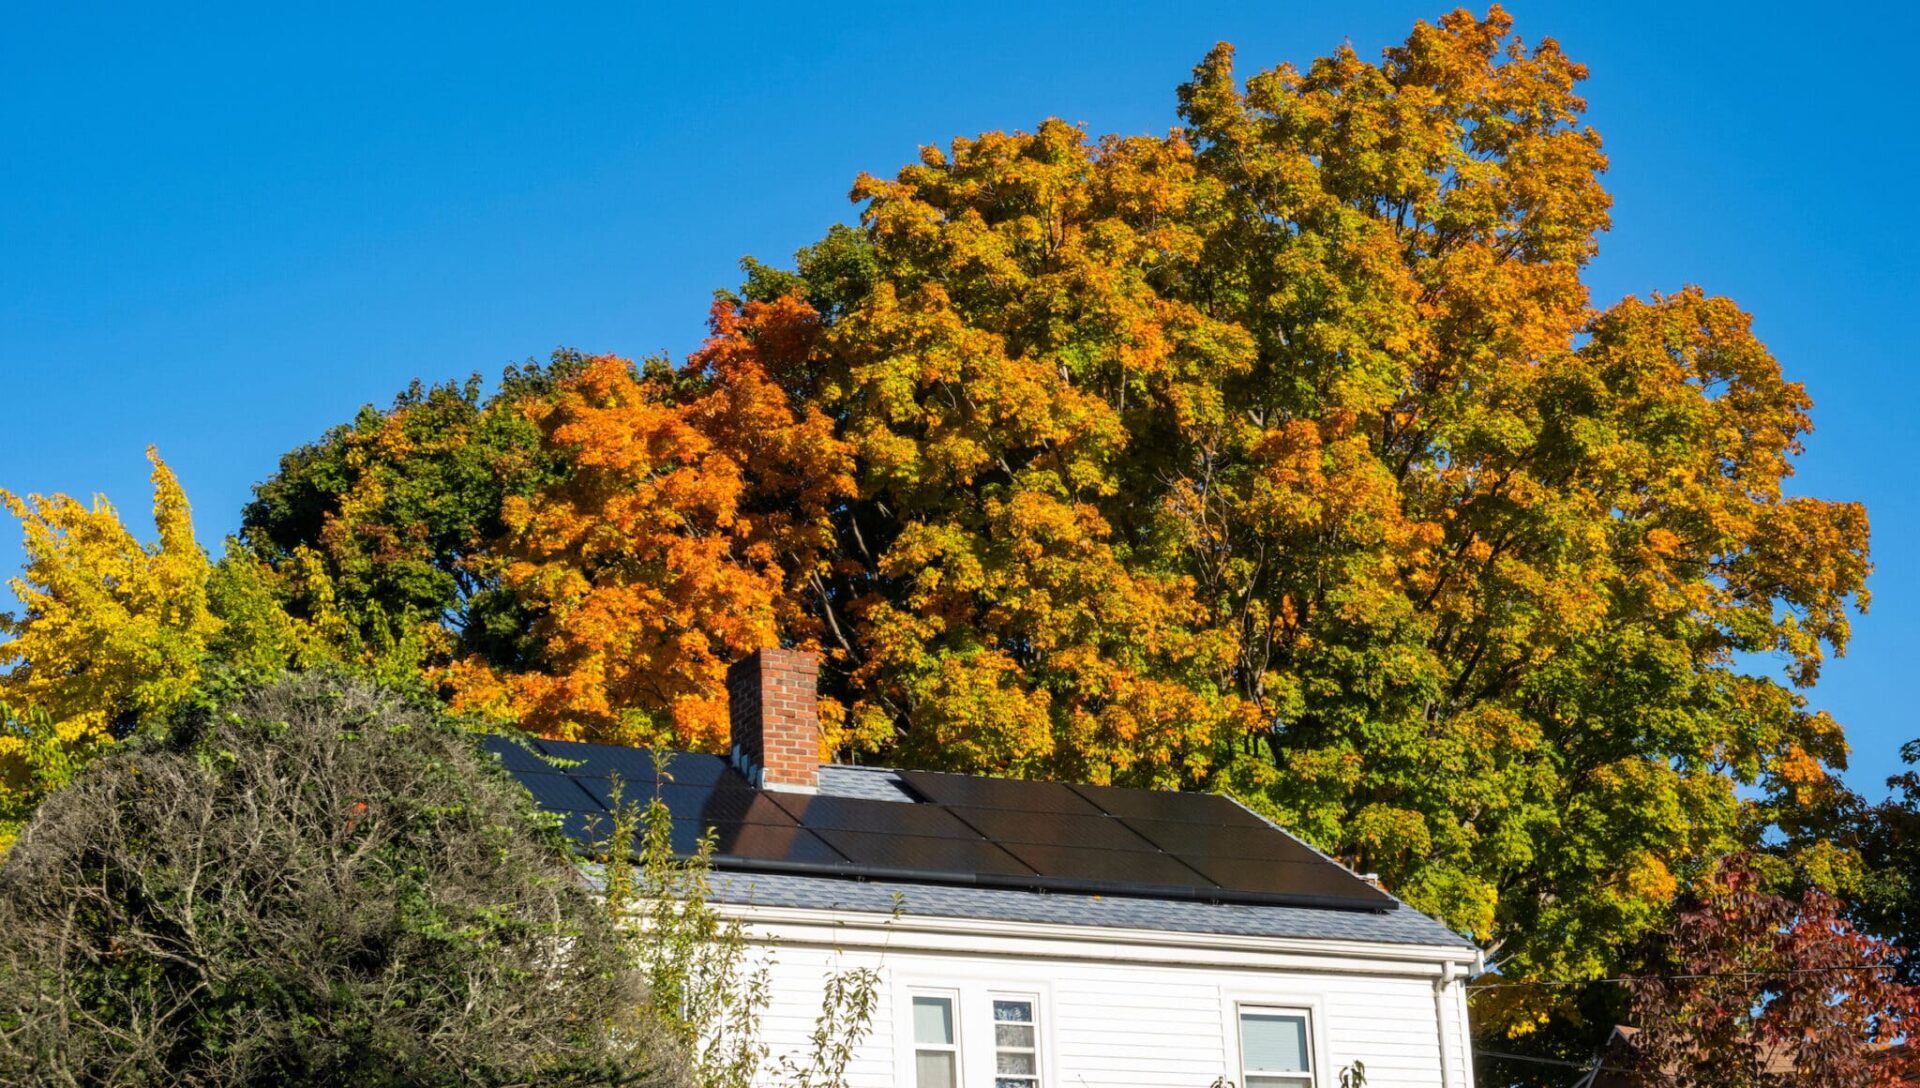 House with solar panels on the roof in autumn, Water Town, Massachusetts, USA